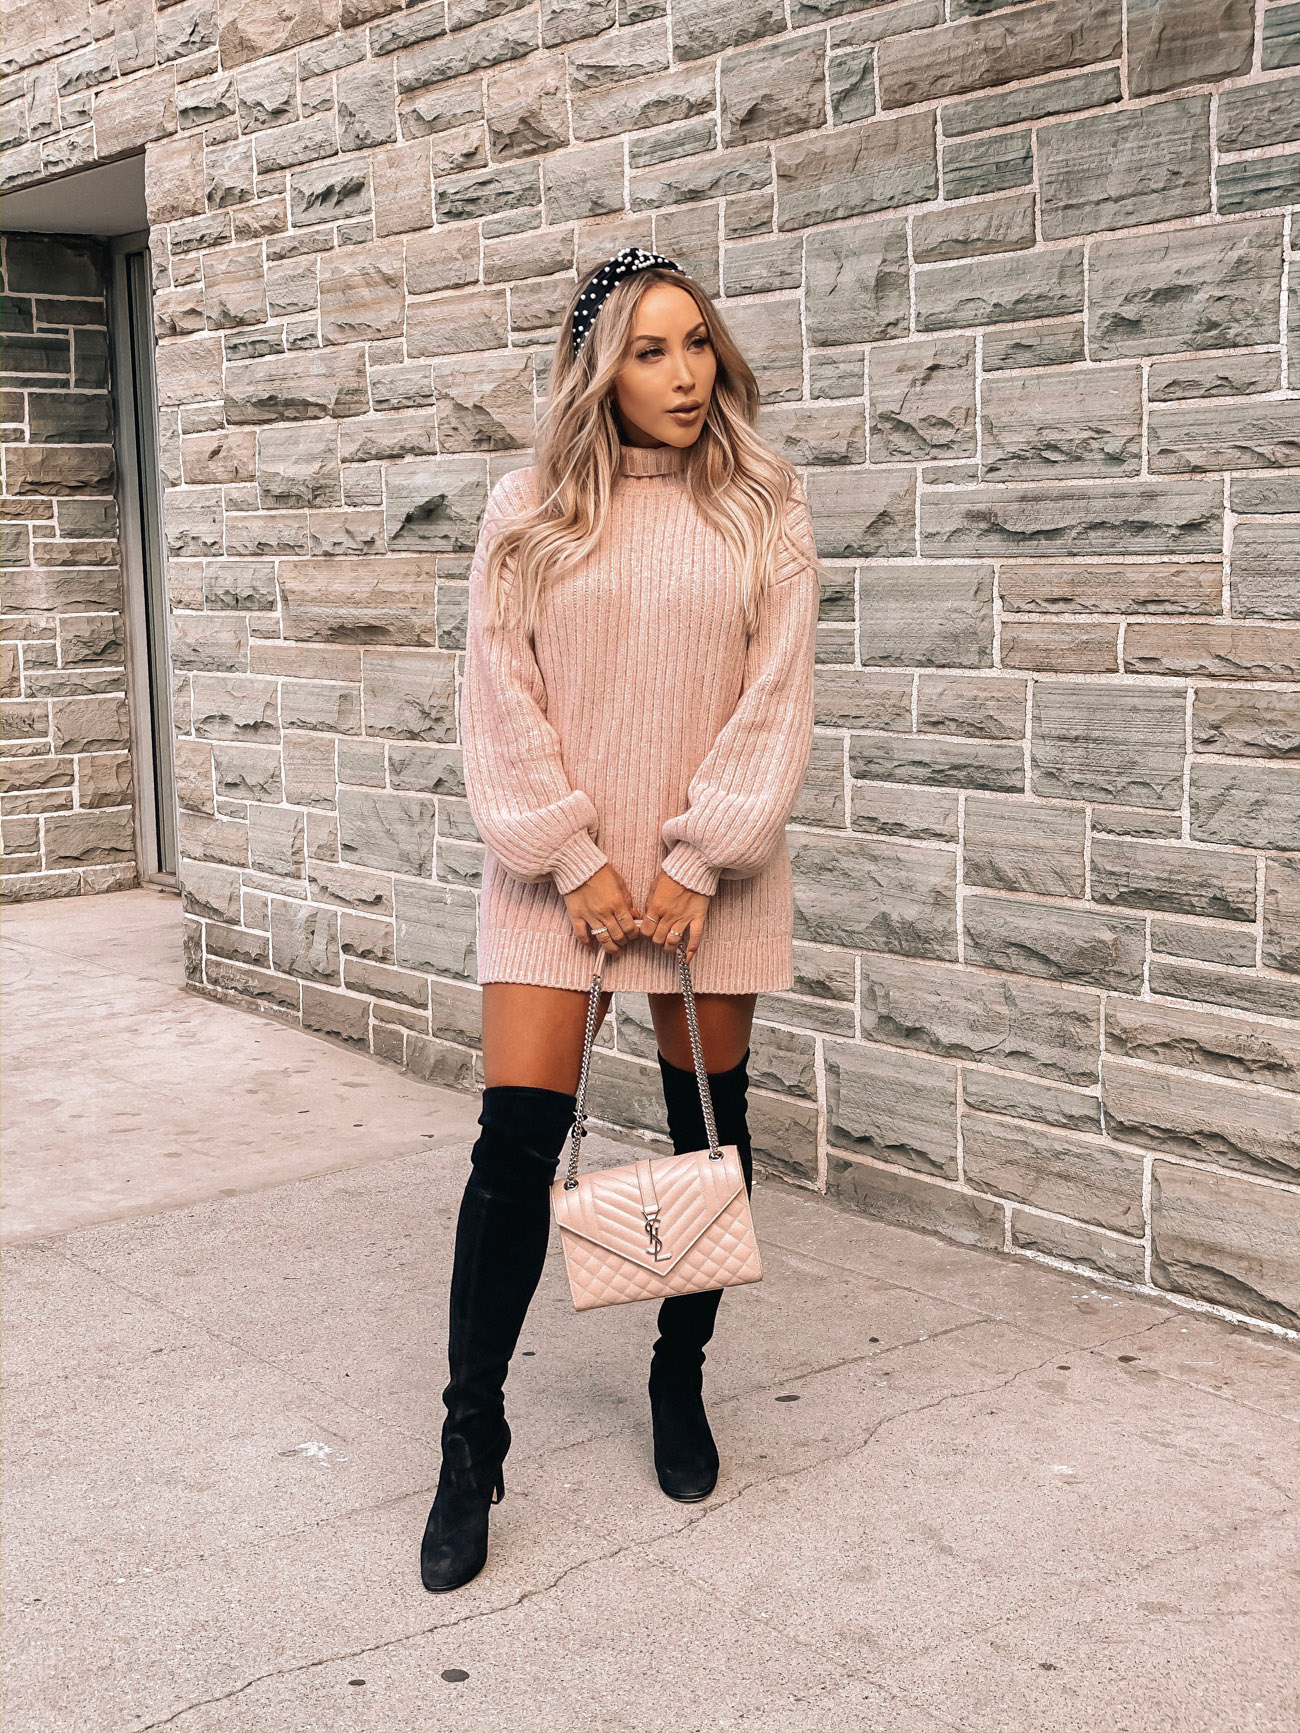 Pink Oversized Sweater | House of Harlow | Black Stuart Weitzman Boots | Pearl Headband | Pink YSL Bag | Blondie in the City by Hayley Larue